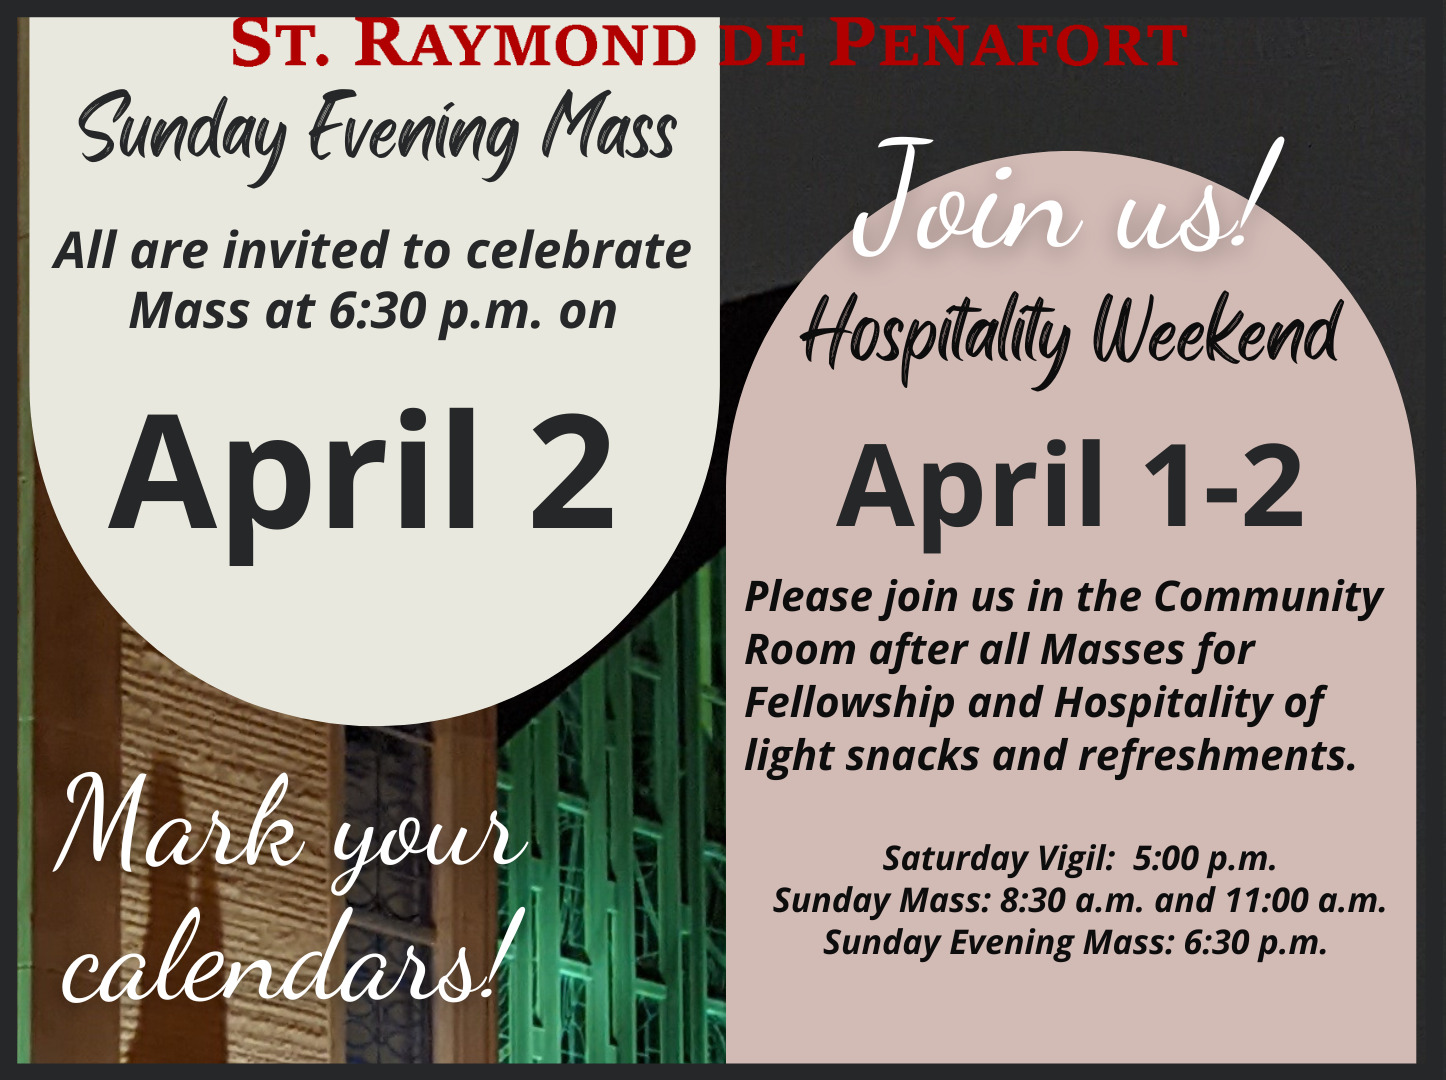 Evening Mass and Hospitality Weekends